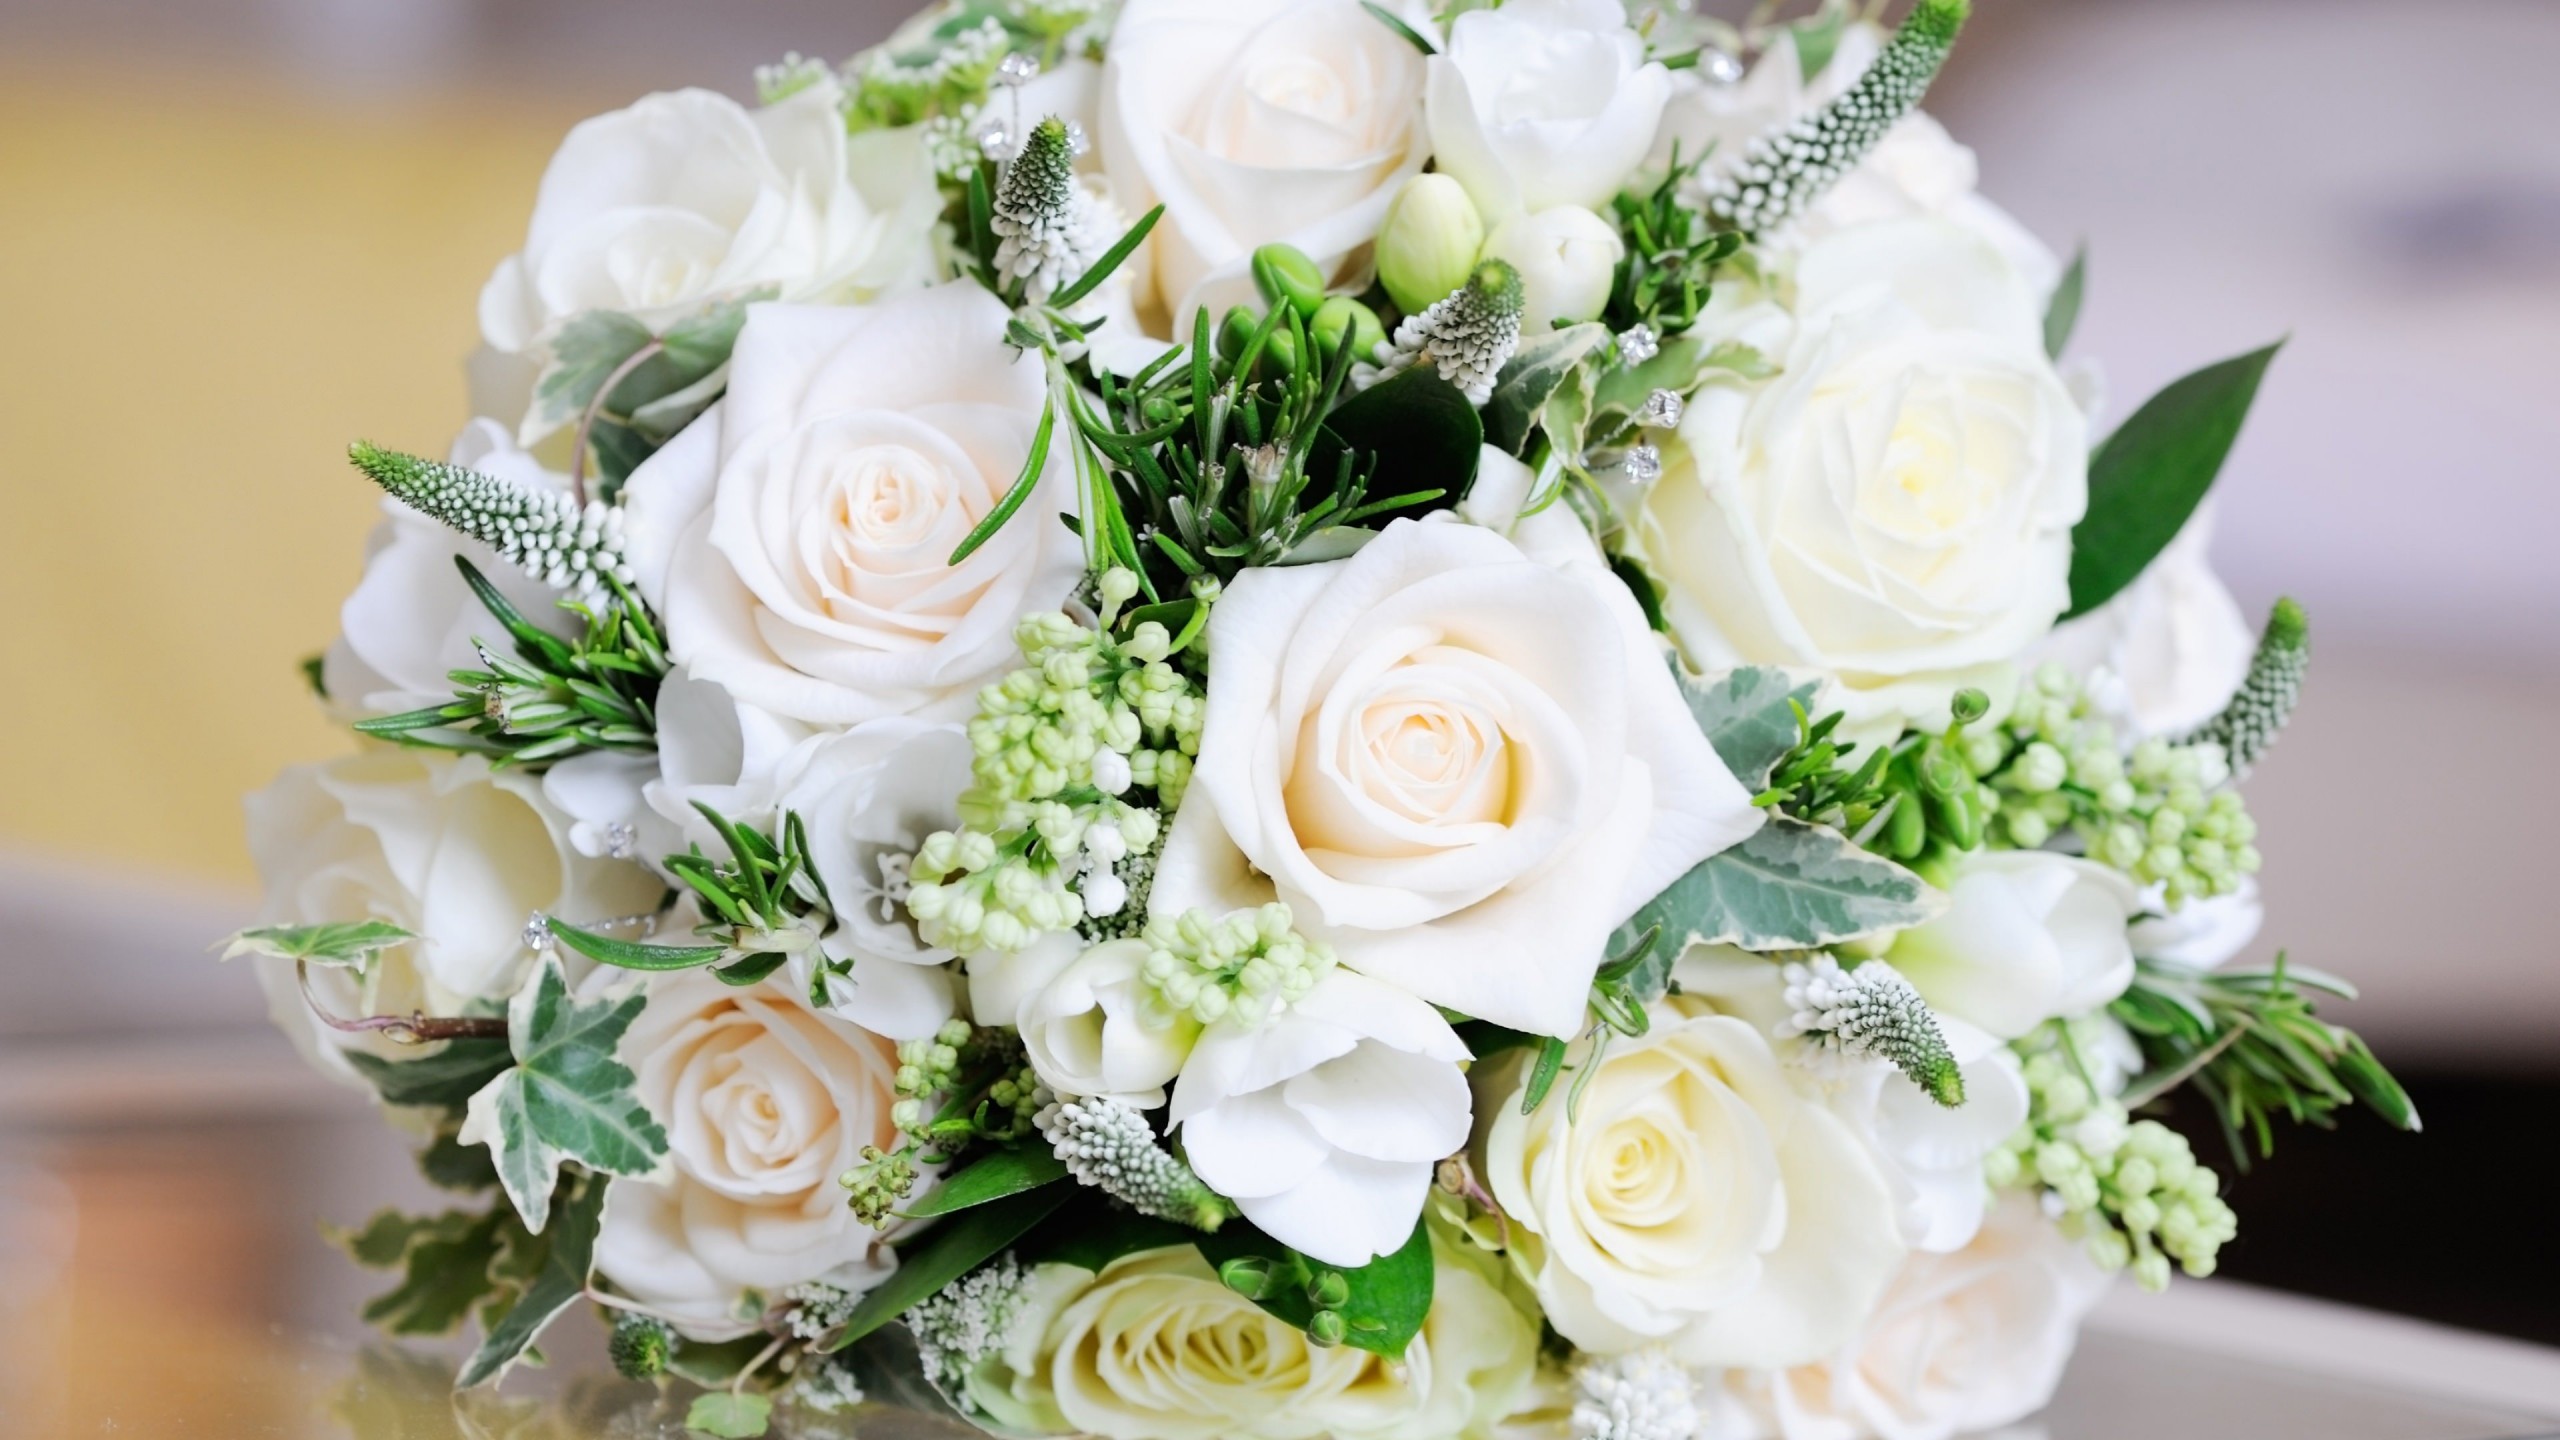 Beautiful White Roses Bouquet Wallpaper for Social Media YouTube Channel Art